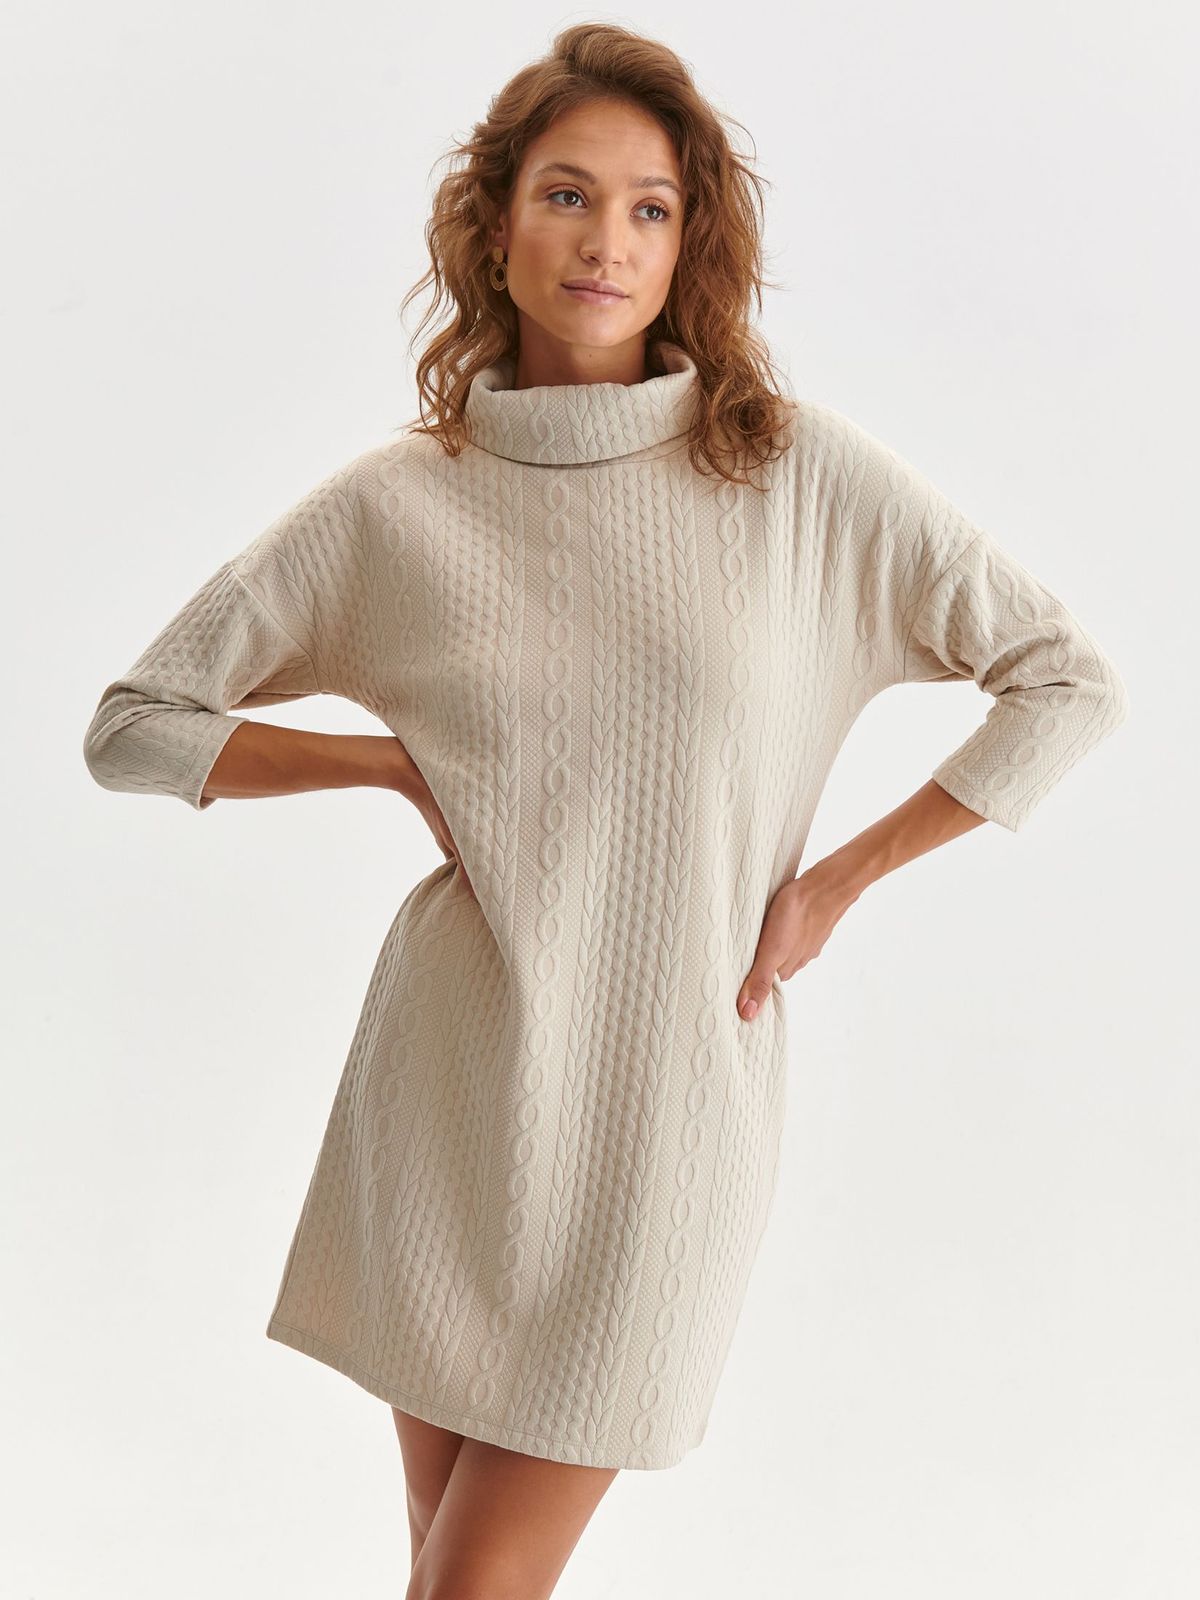 Peach dress knitted with turtle neck loose fit